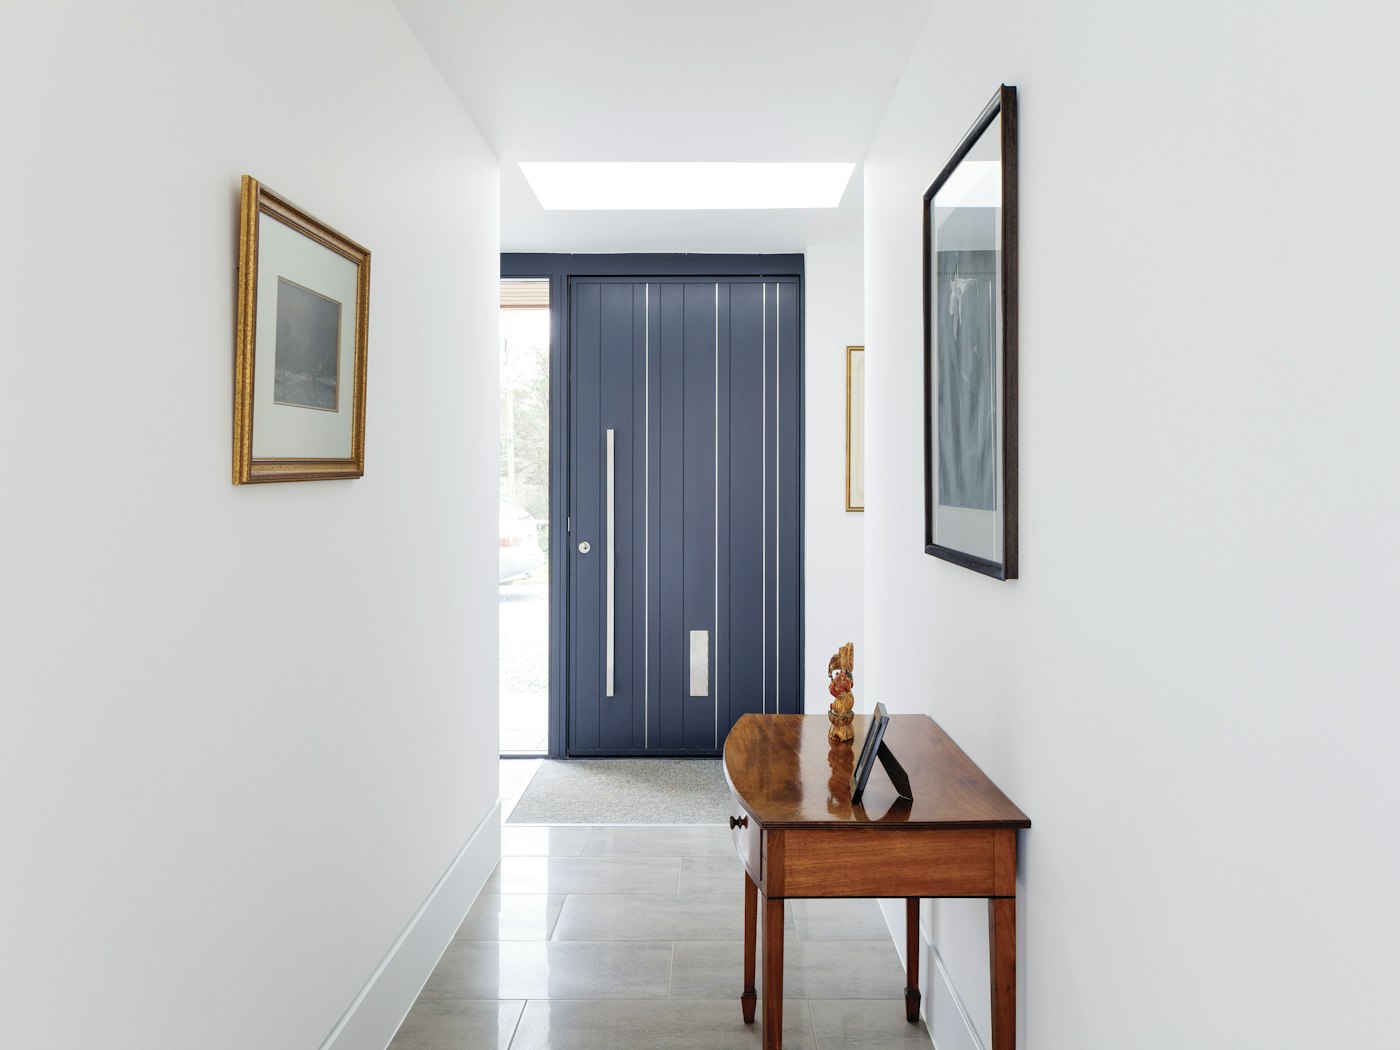 Bright white interiors are a popular choice for grey doors with good reason